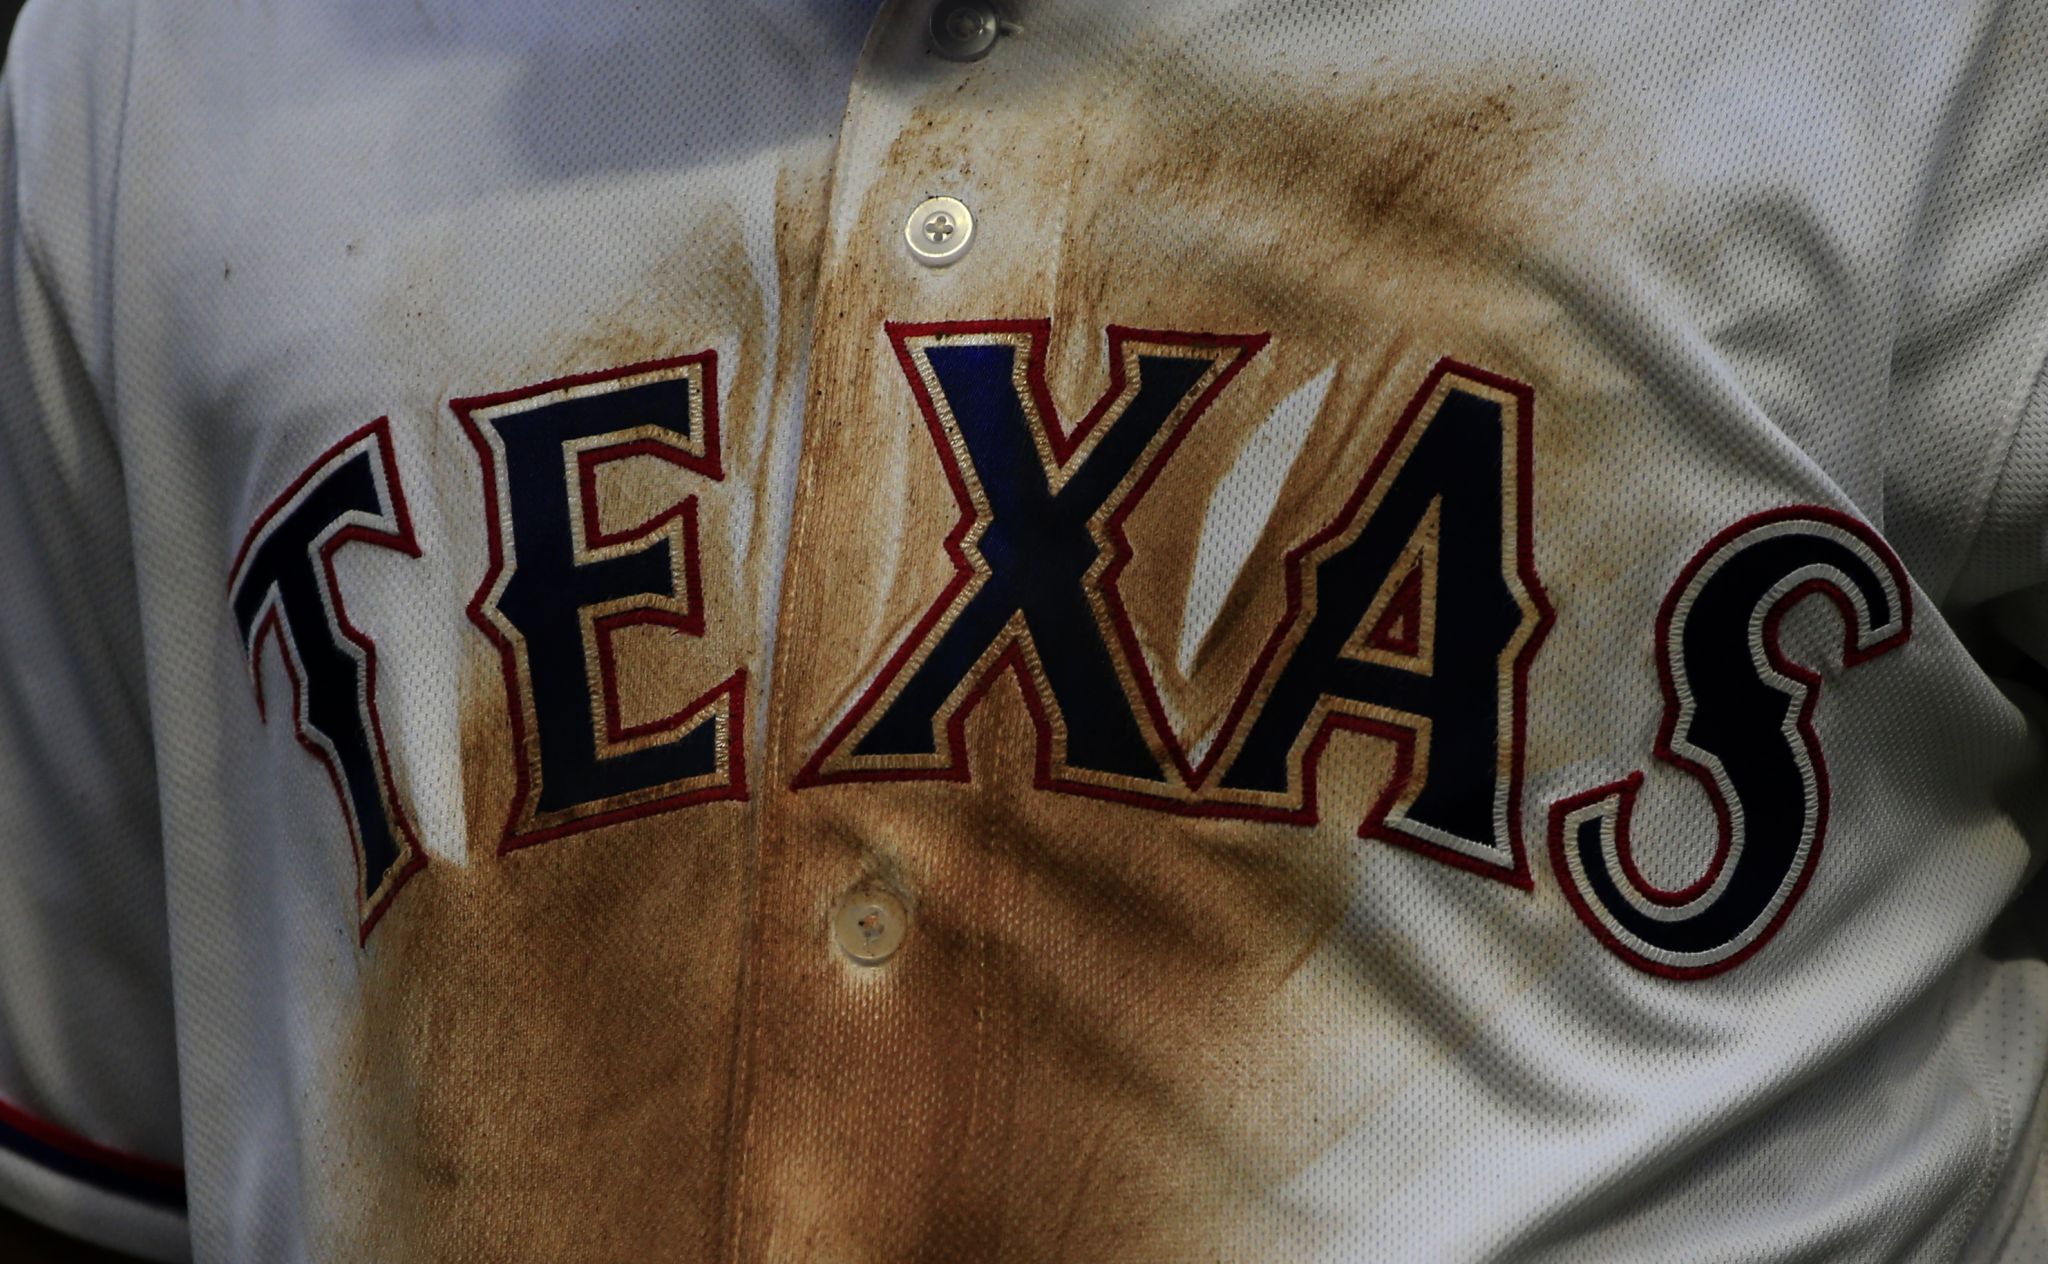 Texas Rangers: Petition calls for removal of state flag from jerseys